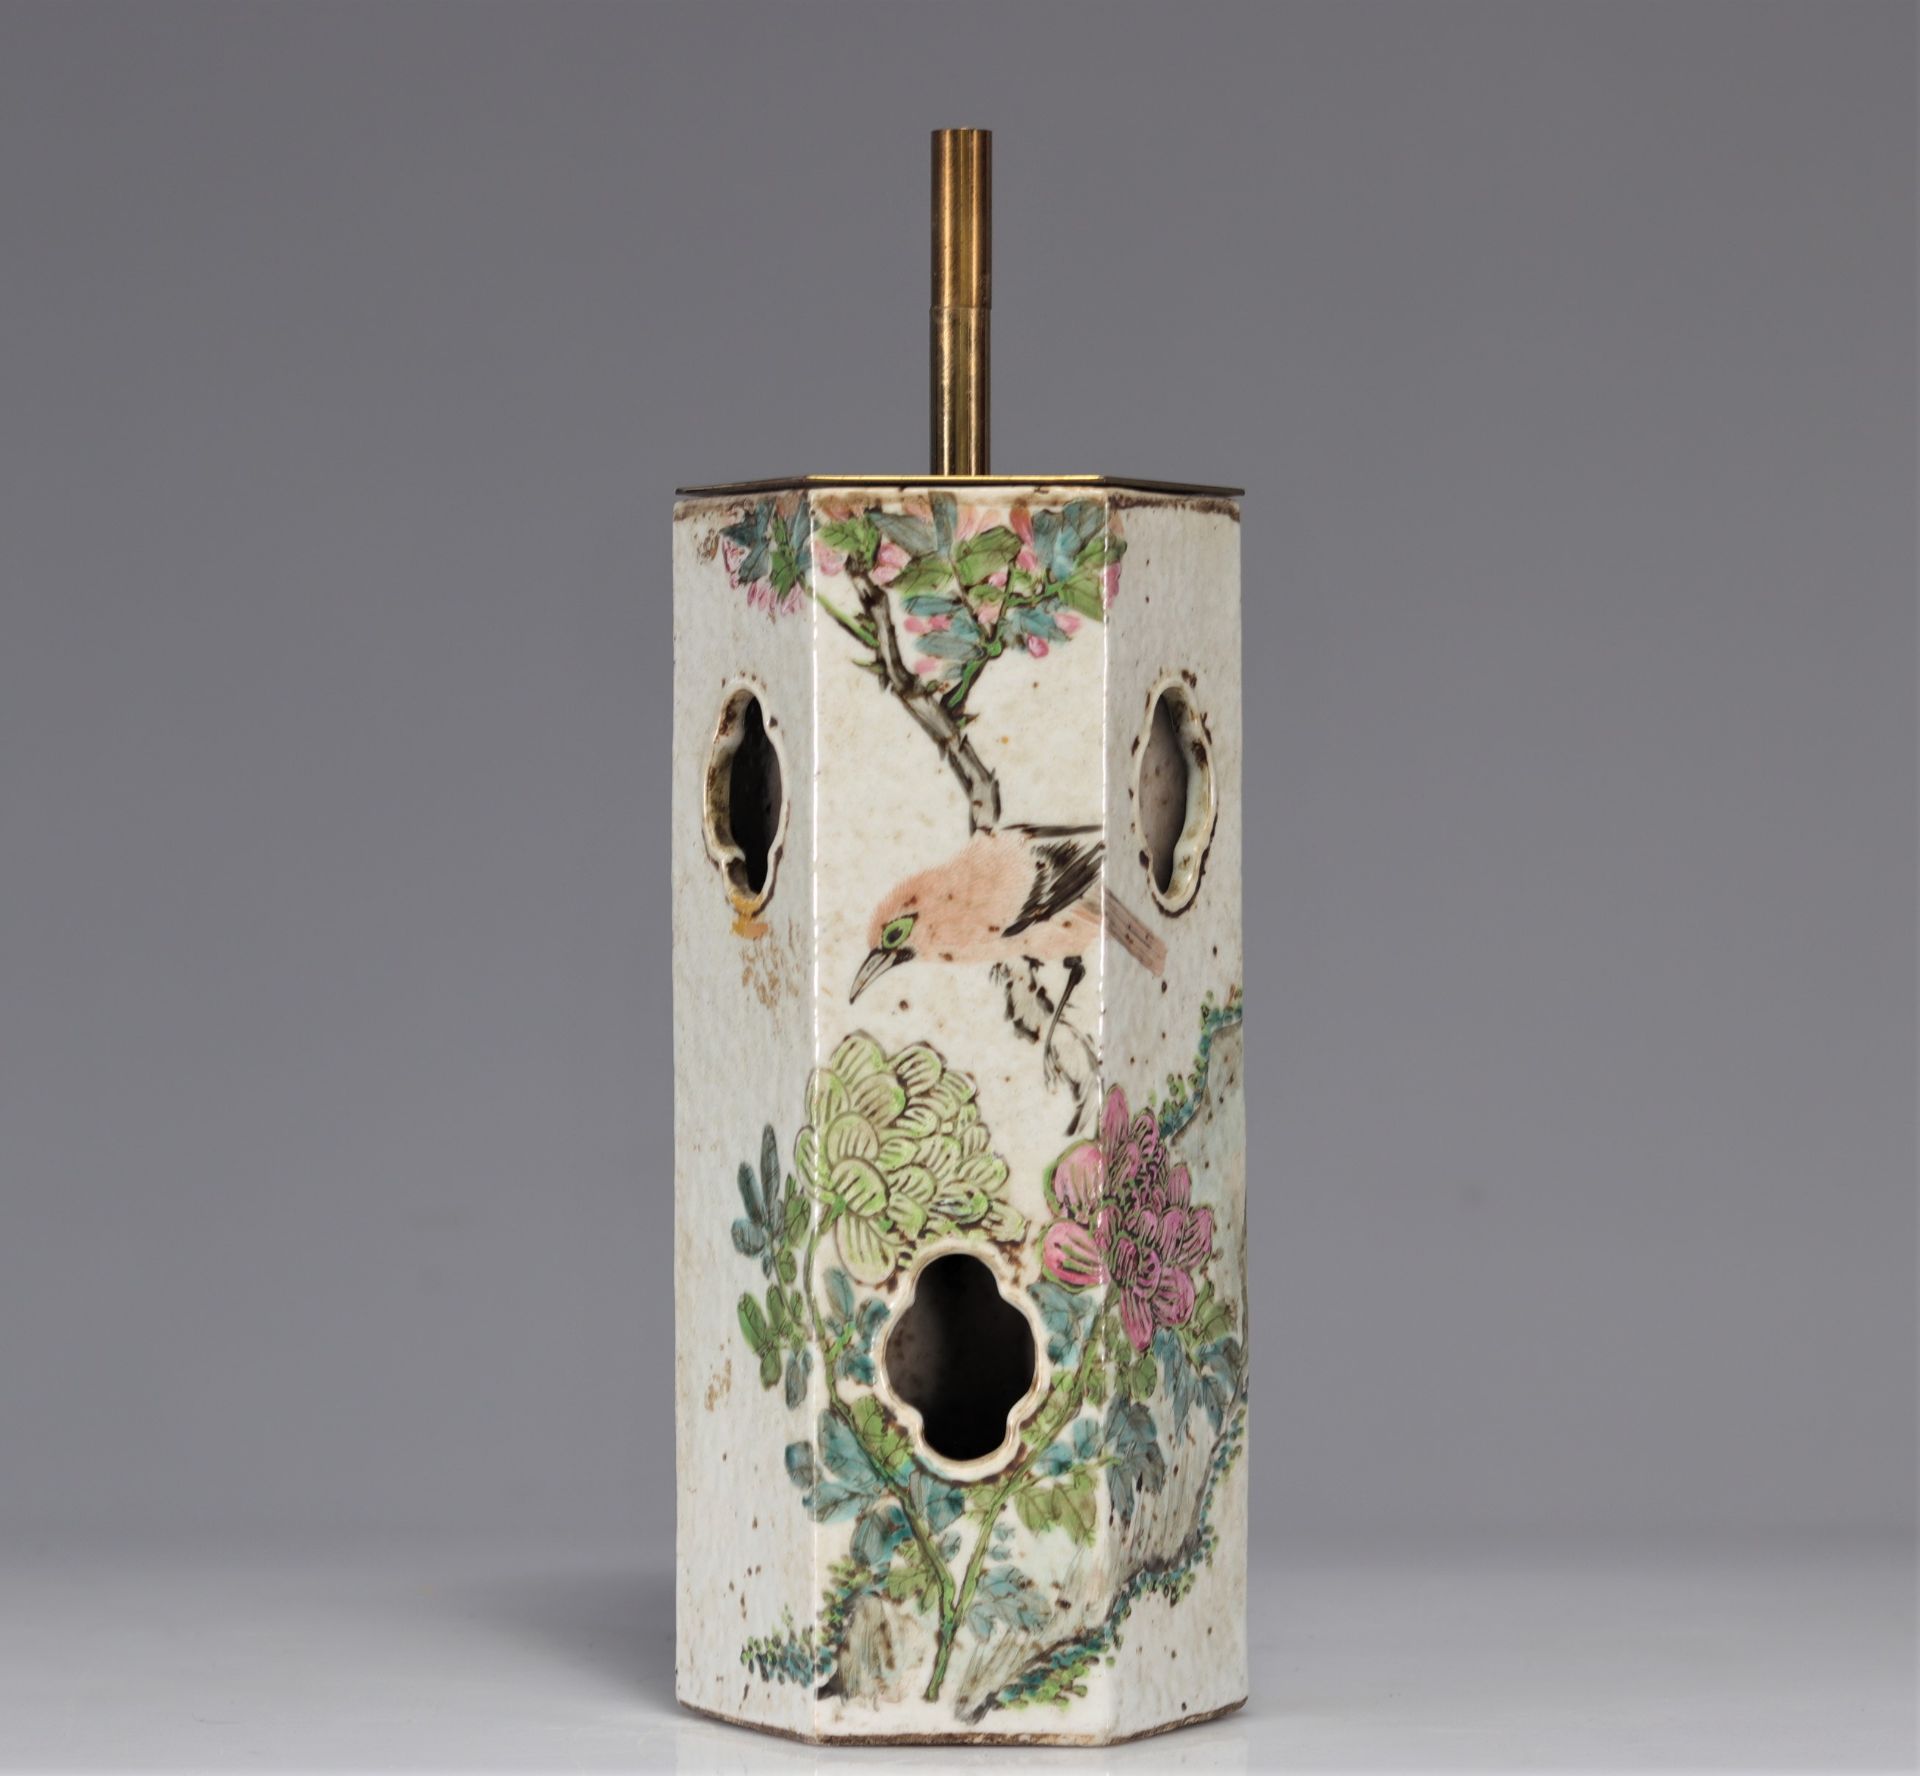 Qianjiang cai porcelain vase decorated with birds